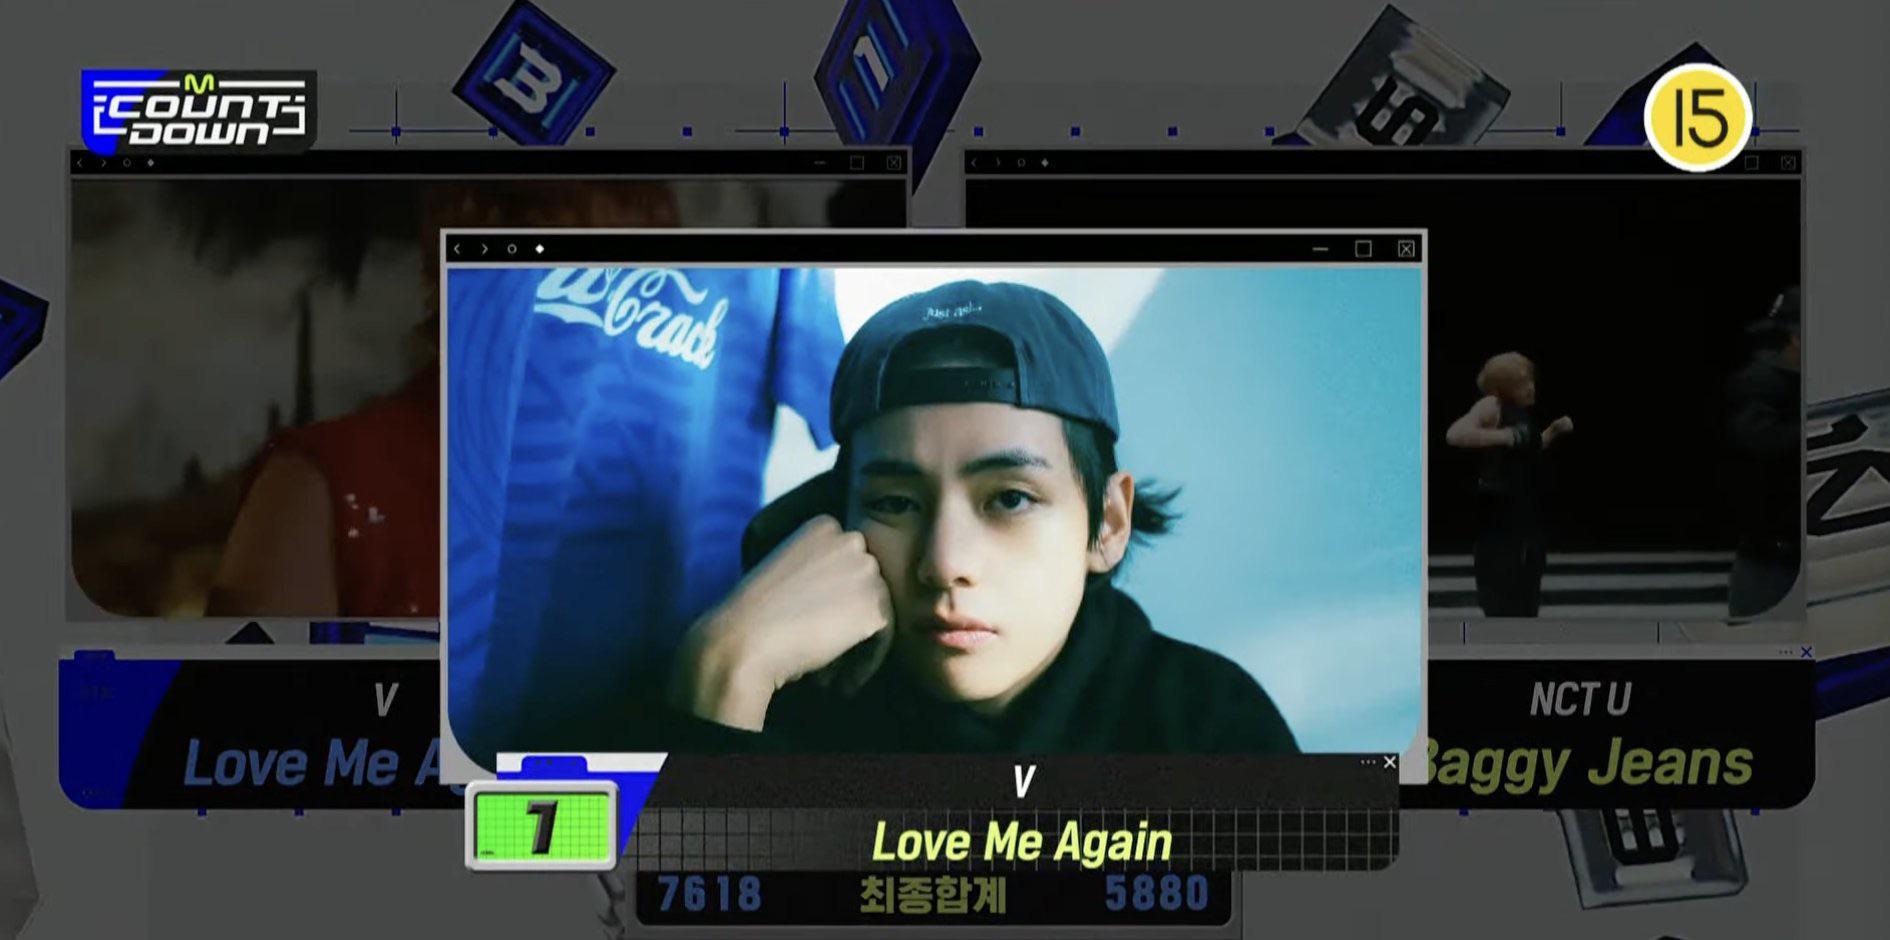 Taehyung has taken his 3rd win for “Love Me Again” and earned a Triple Crown on M Countdown! - 070923